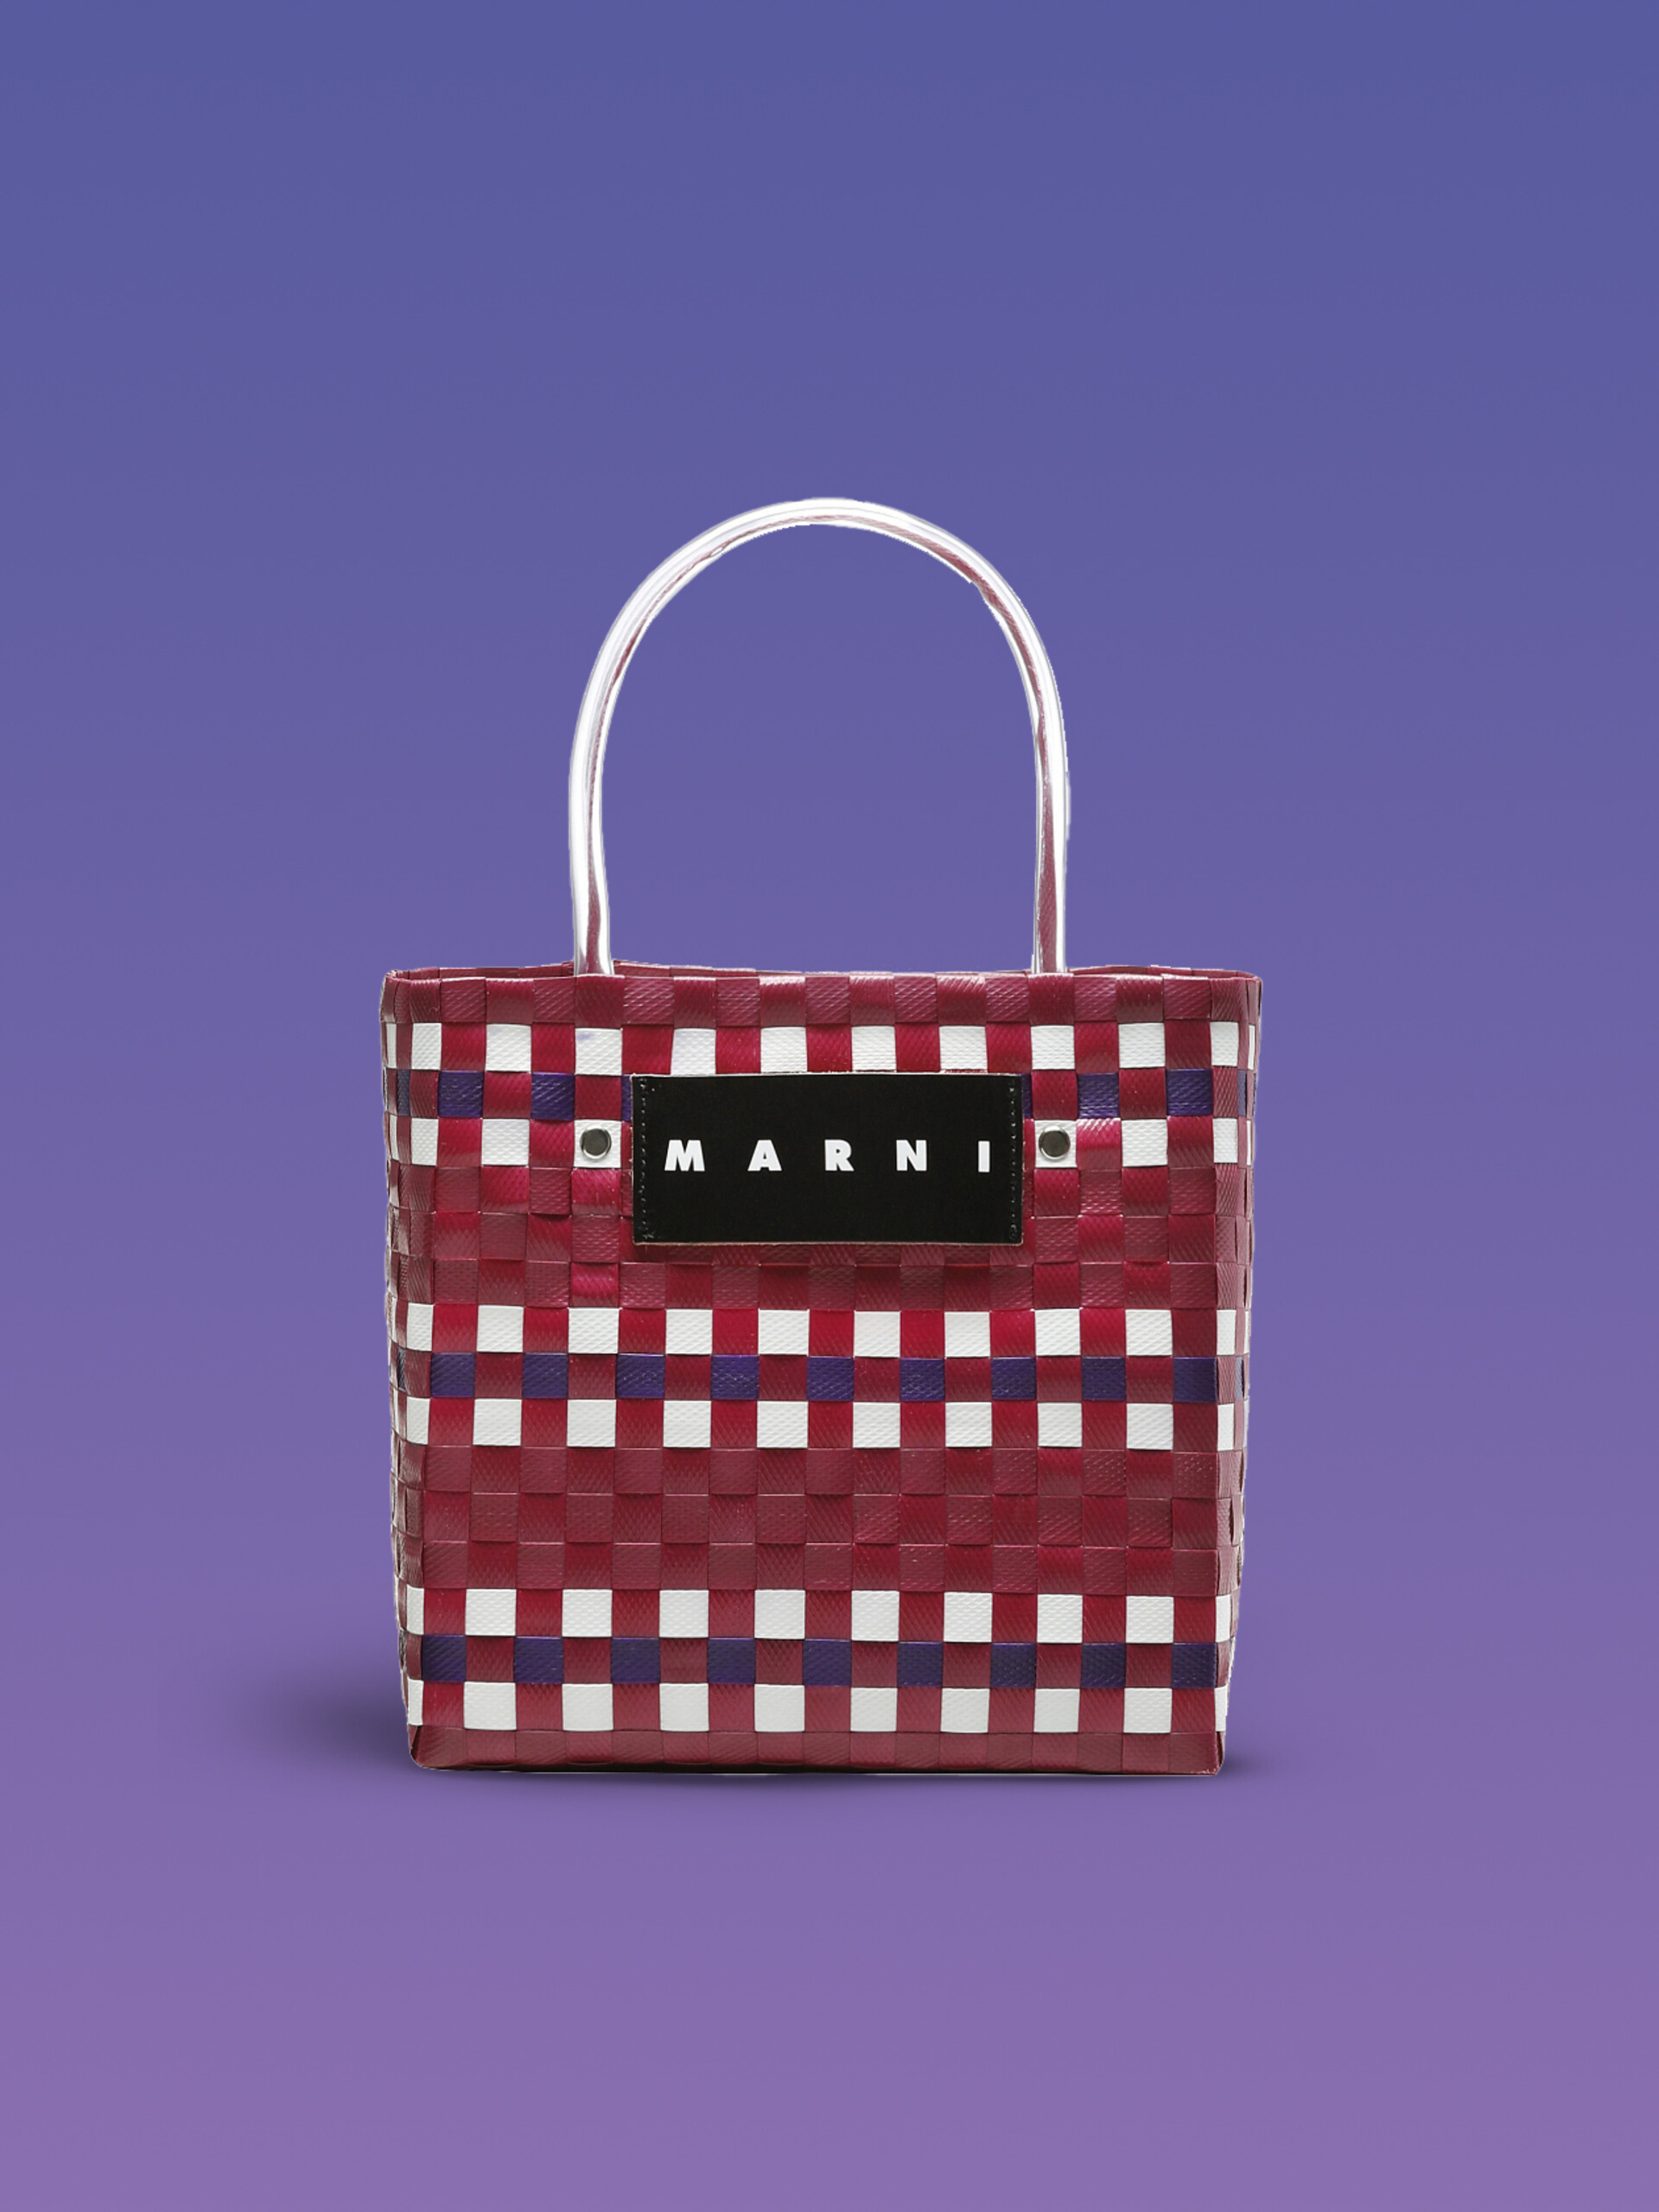 MARNI MARKET BASKET bag in pink woven material - Shopping Bags - Image 1